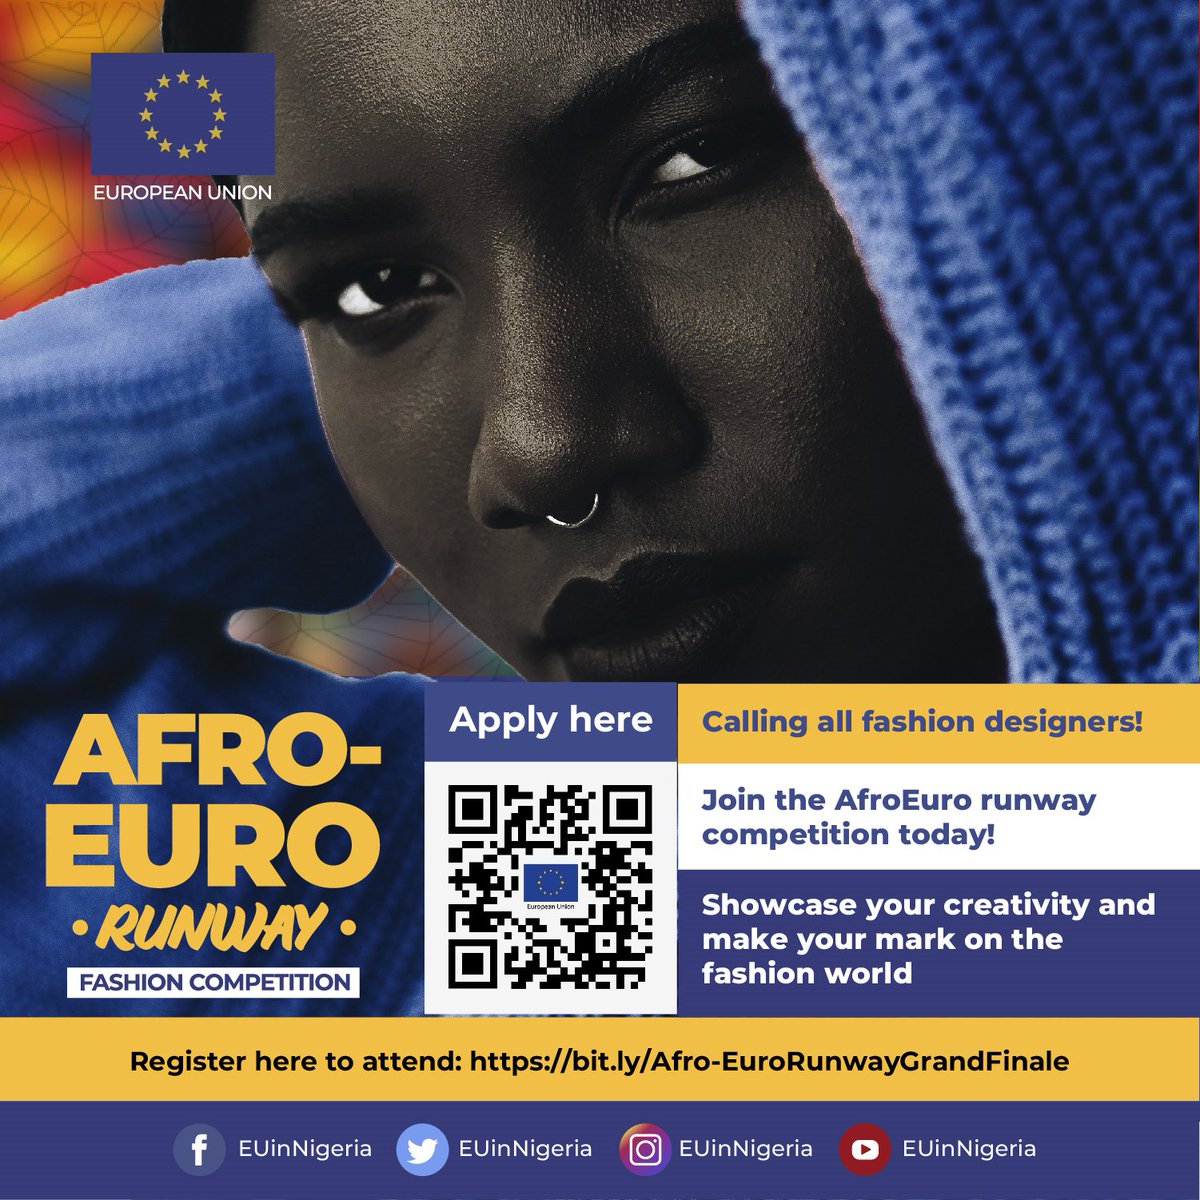 Tell a fashion designer that you know to apply for the Afro-Euro Runway Competition! Share the link with them: bit.ly/Afro-EuroRunwa…
#EUinNigeria #FashionDesigners #Competition #ApplyNow #FashionCompetition #FashionDesignersinNigeria